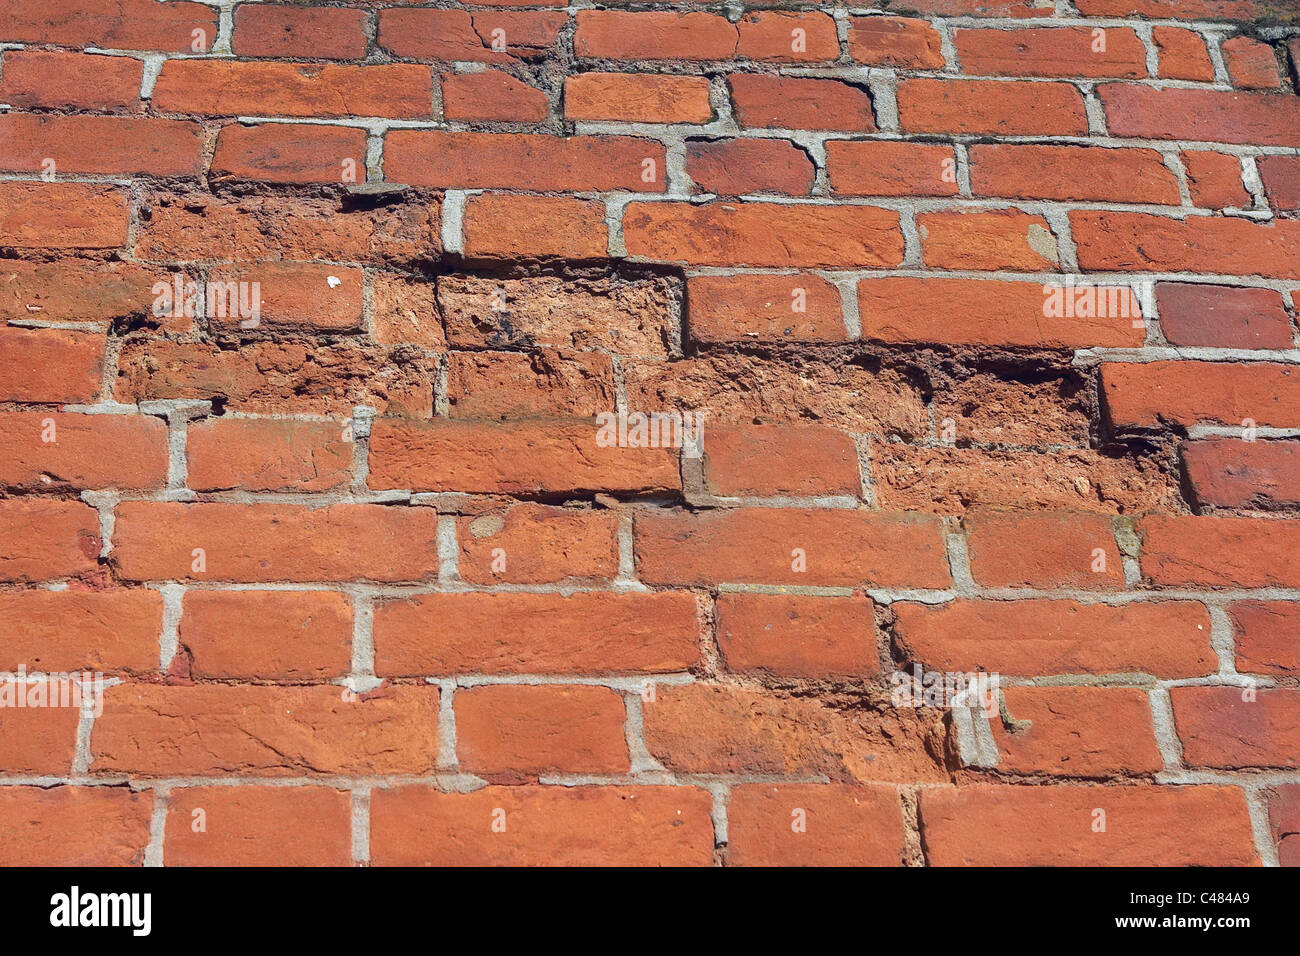 Spalling Brickwork High Resolution Stock Photography and Images